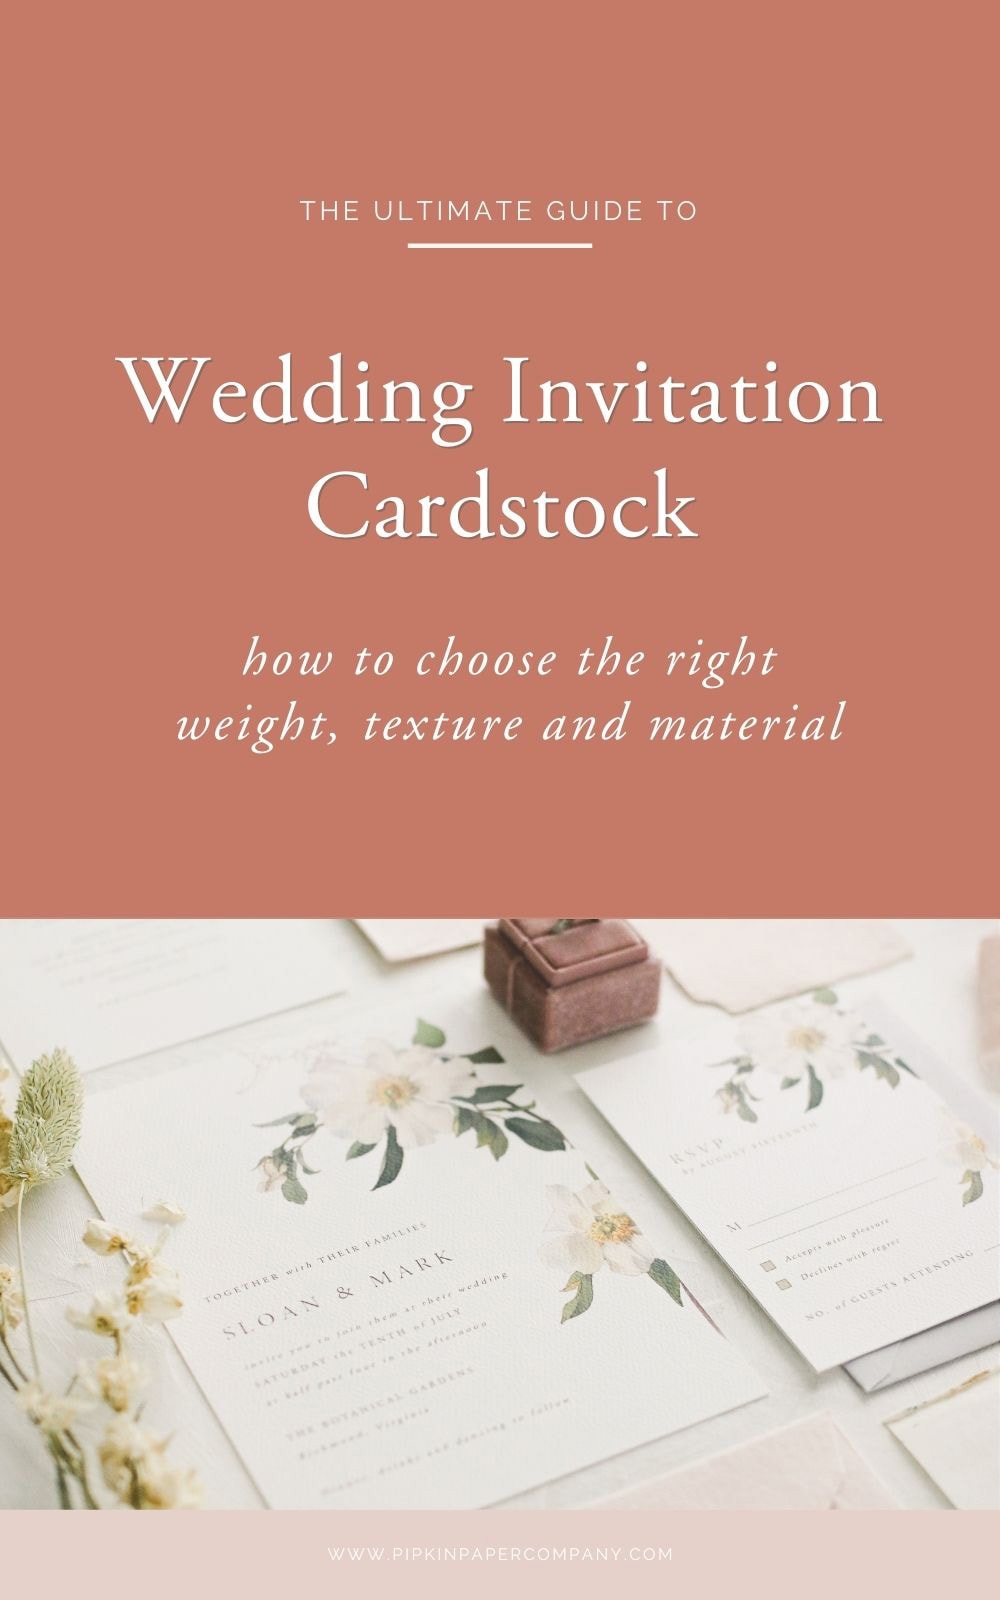 Cardstock 101: How to Choose Paper for Wedding Invitations | Pipkin